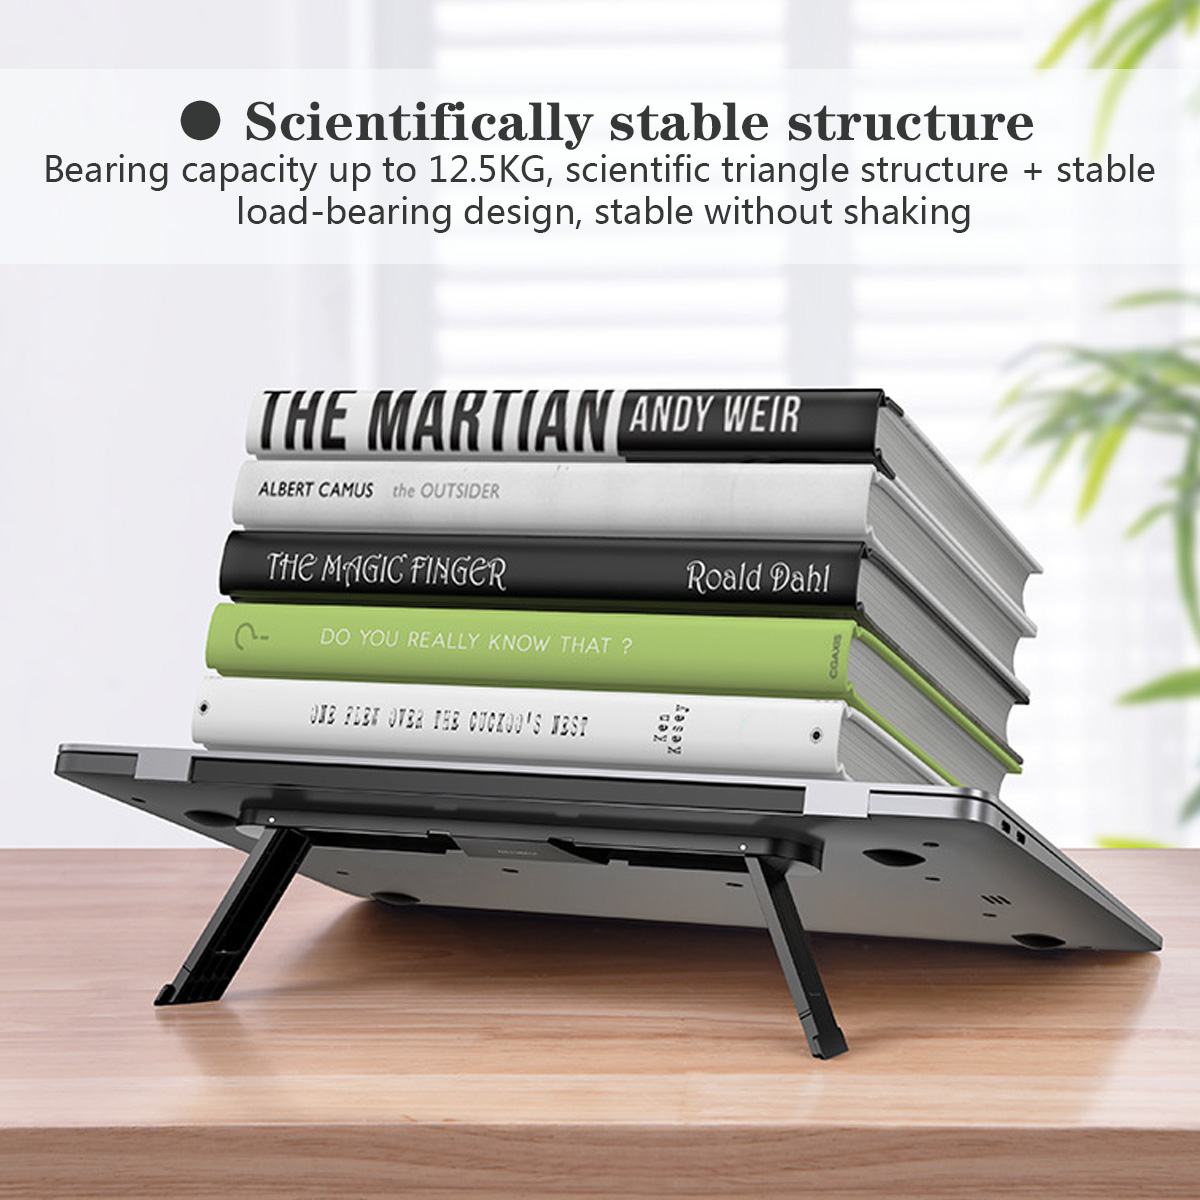 Portable-Folding-Double-Angle-Adjustable-Heat-Dissipation-Cooling-Down-Sticky-Macbook-Holder-Stand-f-1832936-6